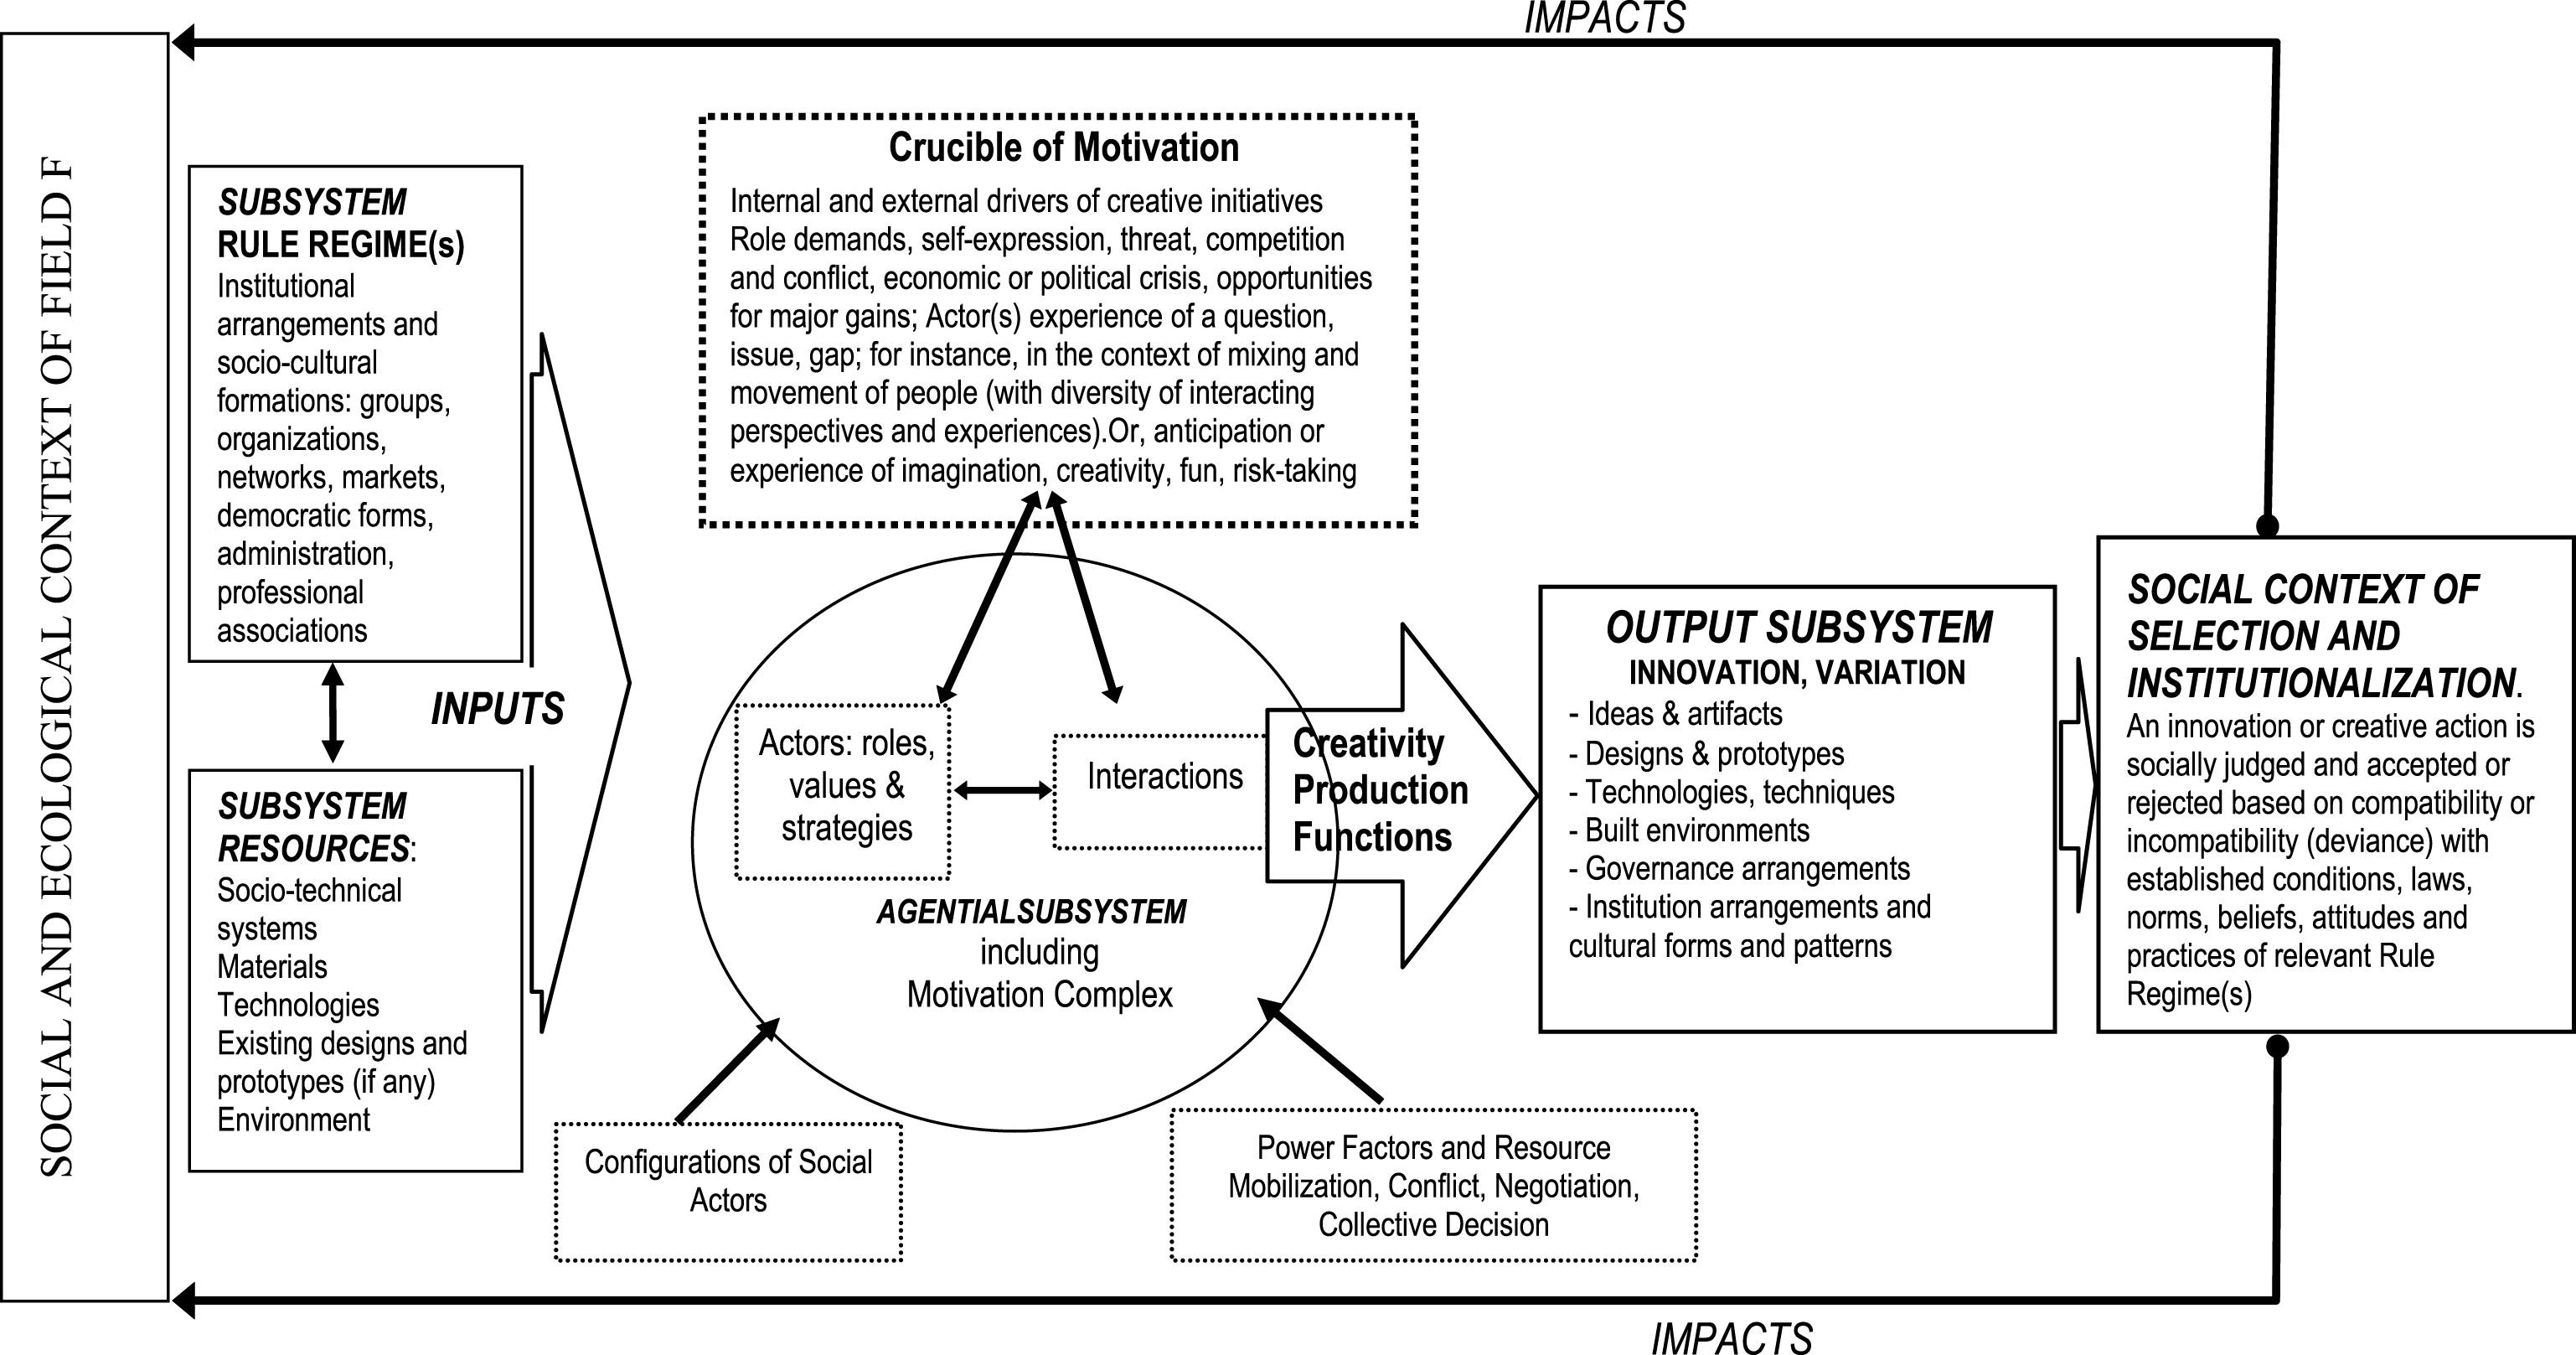 Model of Multiple Factors of Innovation and Creativity in a Social/Ecological Context.